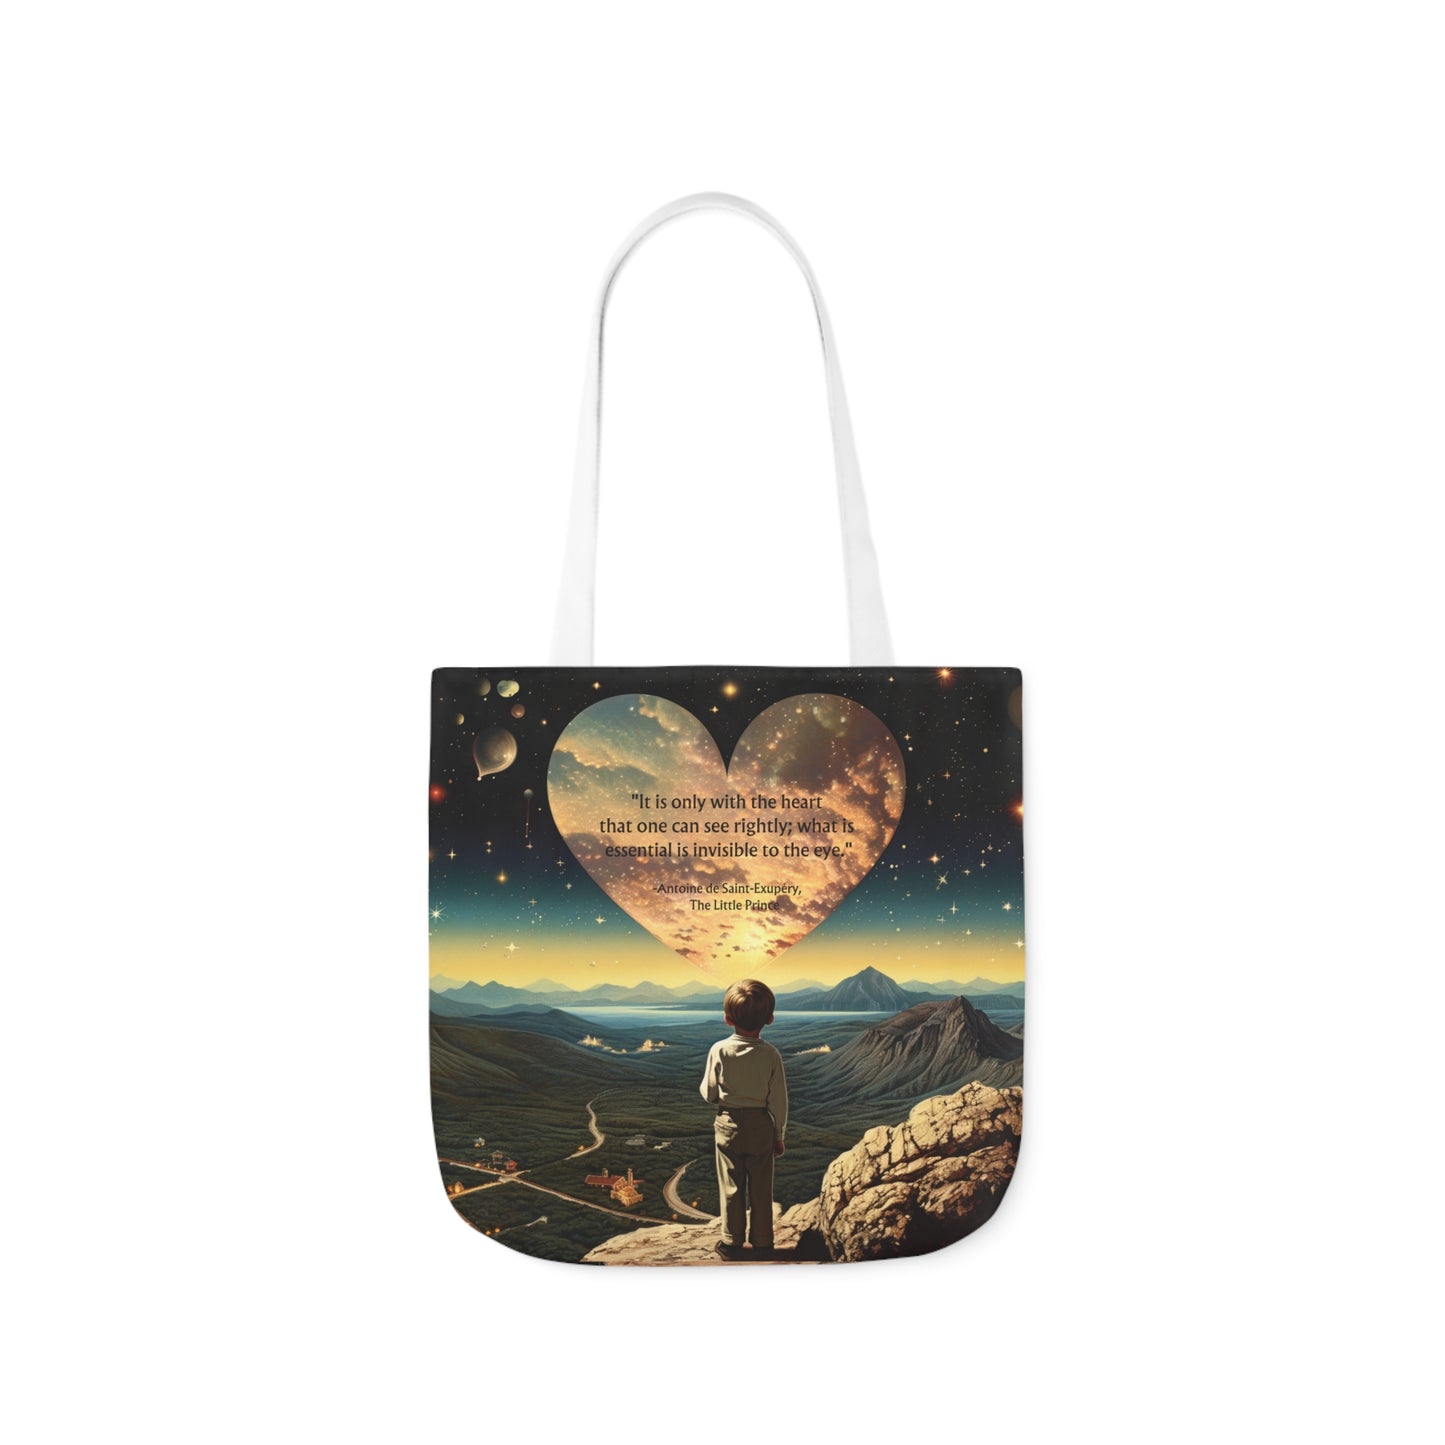 "It is only with the Heart" Little Prince Quote Tote Bag